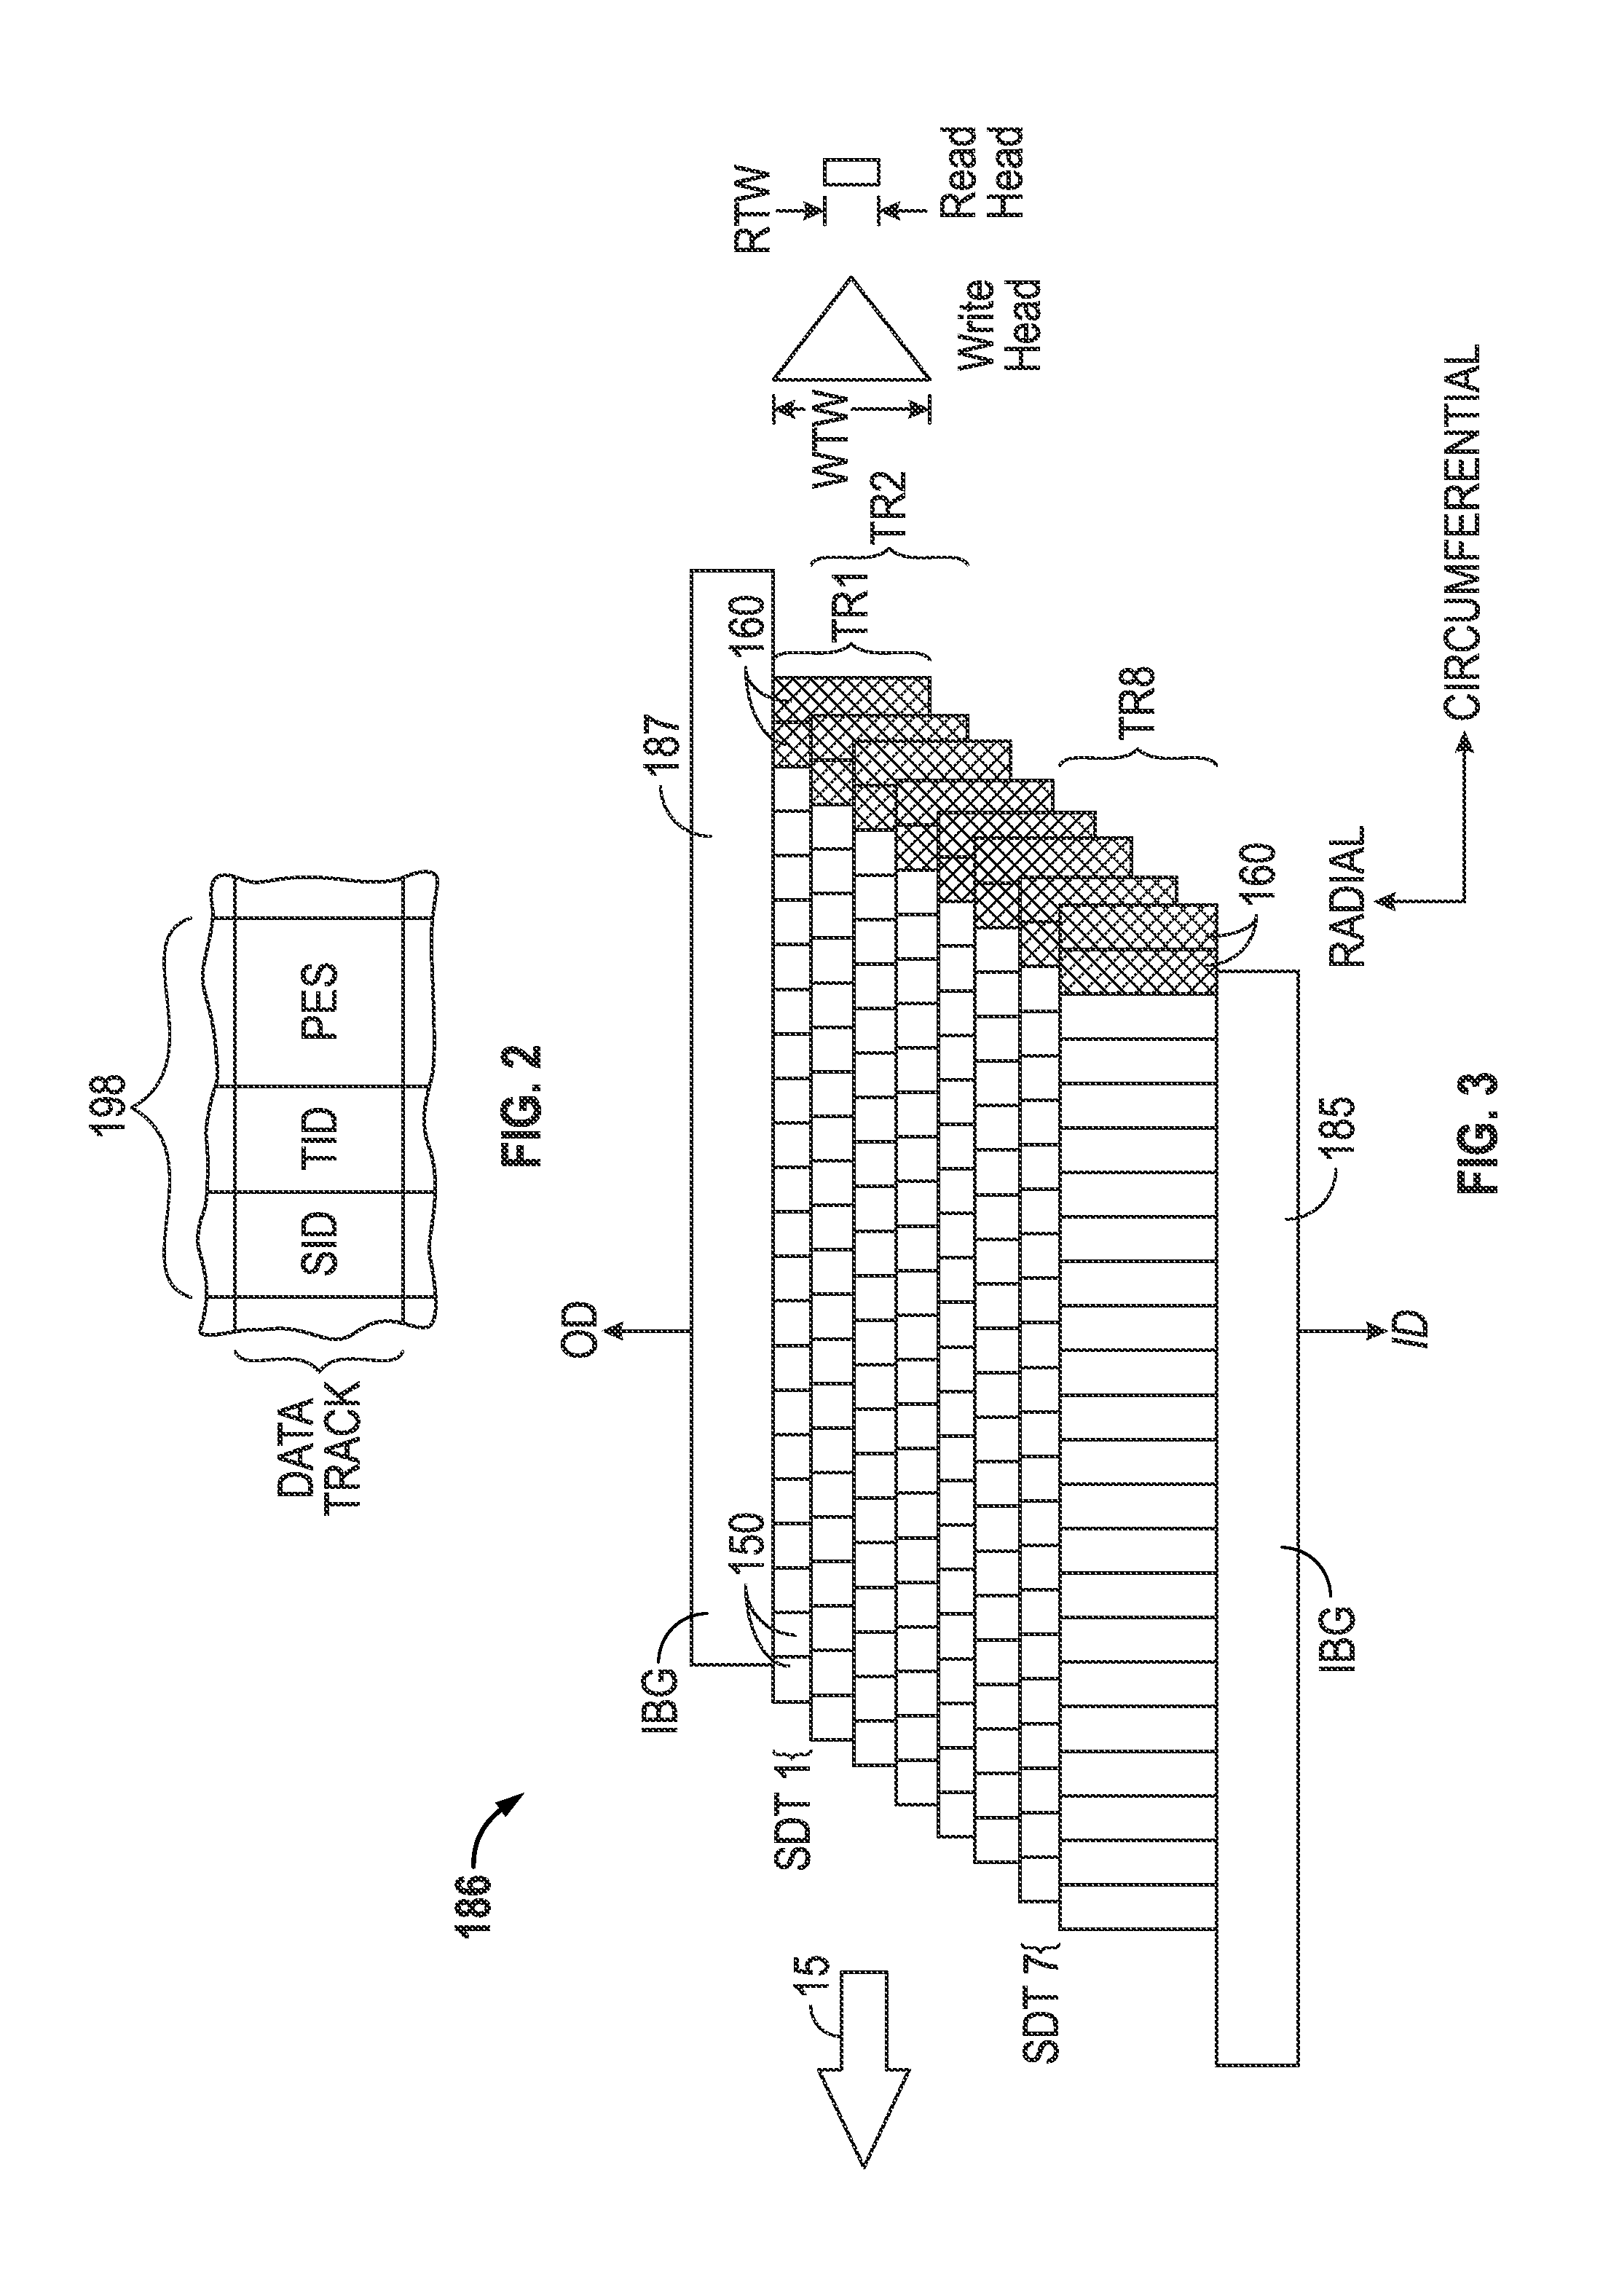 Shingled magnetic recording disk drive with multiple data zones containing different numbers of error-correction-code sectors